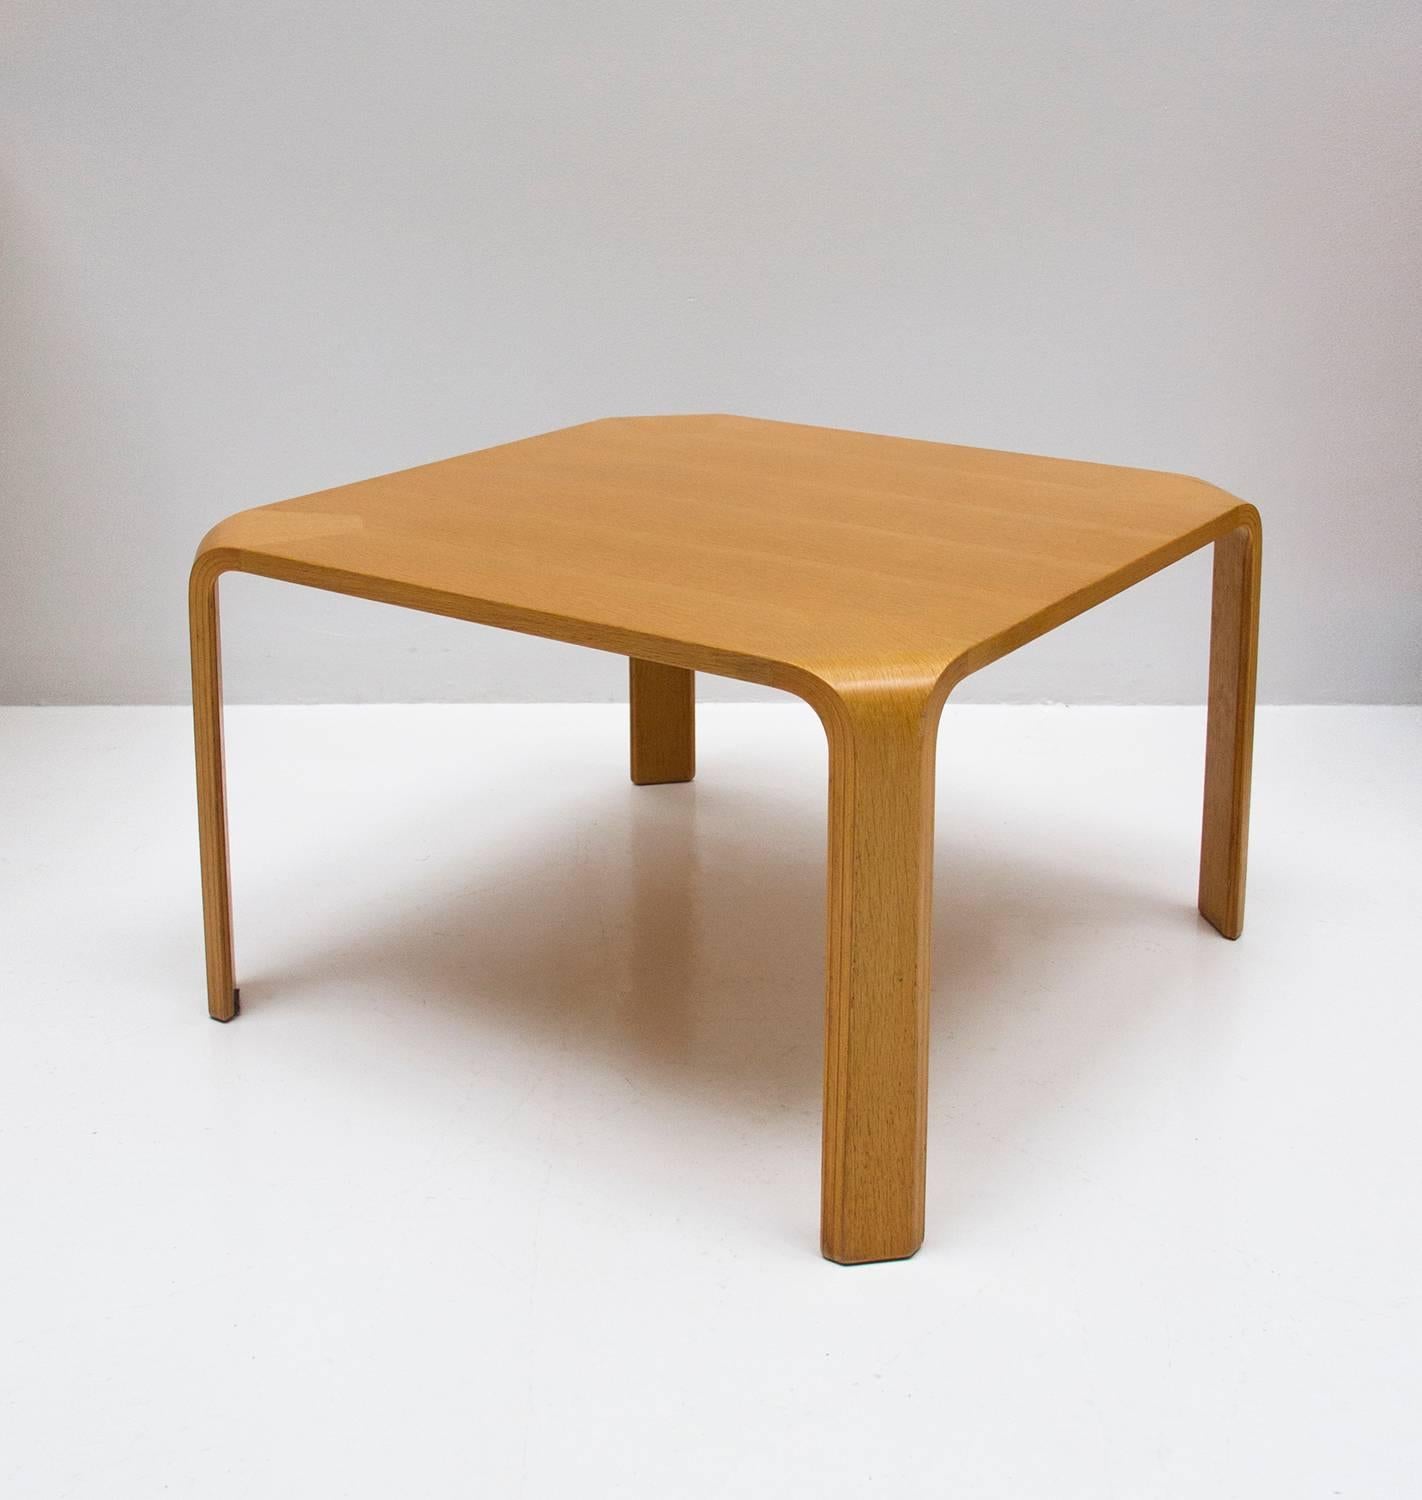 Coffe table designed by Junzo Sakakura manufactured in Tendo Moko. 
Made of teak laminated plywood. 
Designed in 1957 and produced between 1960s, 
Japan, circa 1960-1969

Junzo Sakakura (1904-1969), architect who was one of the first to combine